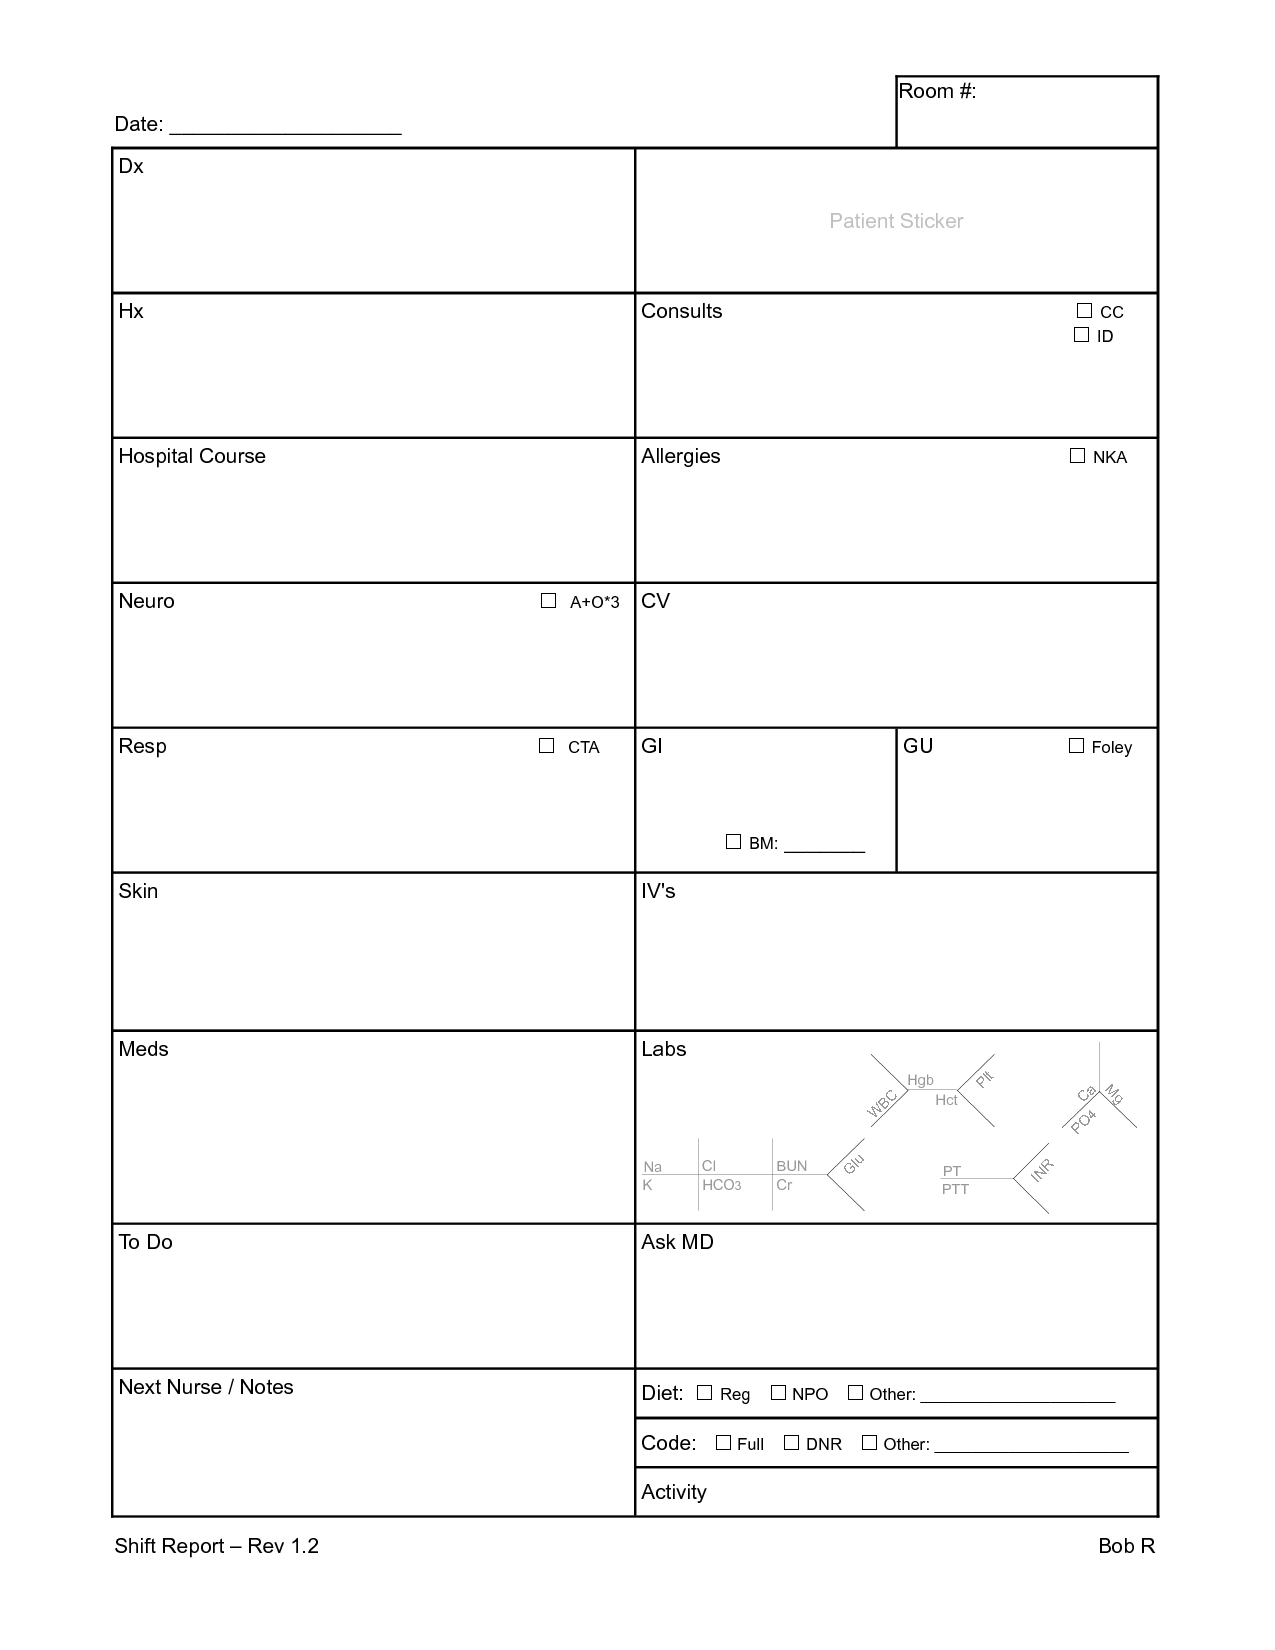 003 Nursing Shift Report Template Unforgettable Ideas Rn Intended For Nursing Report Sheet Templates